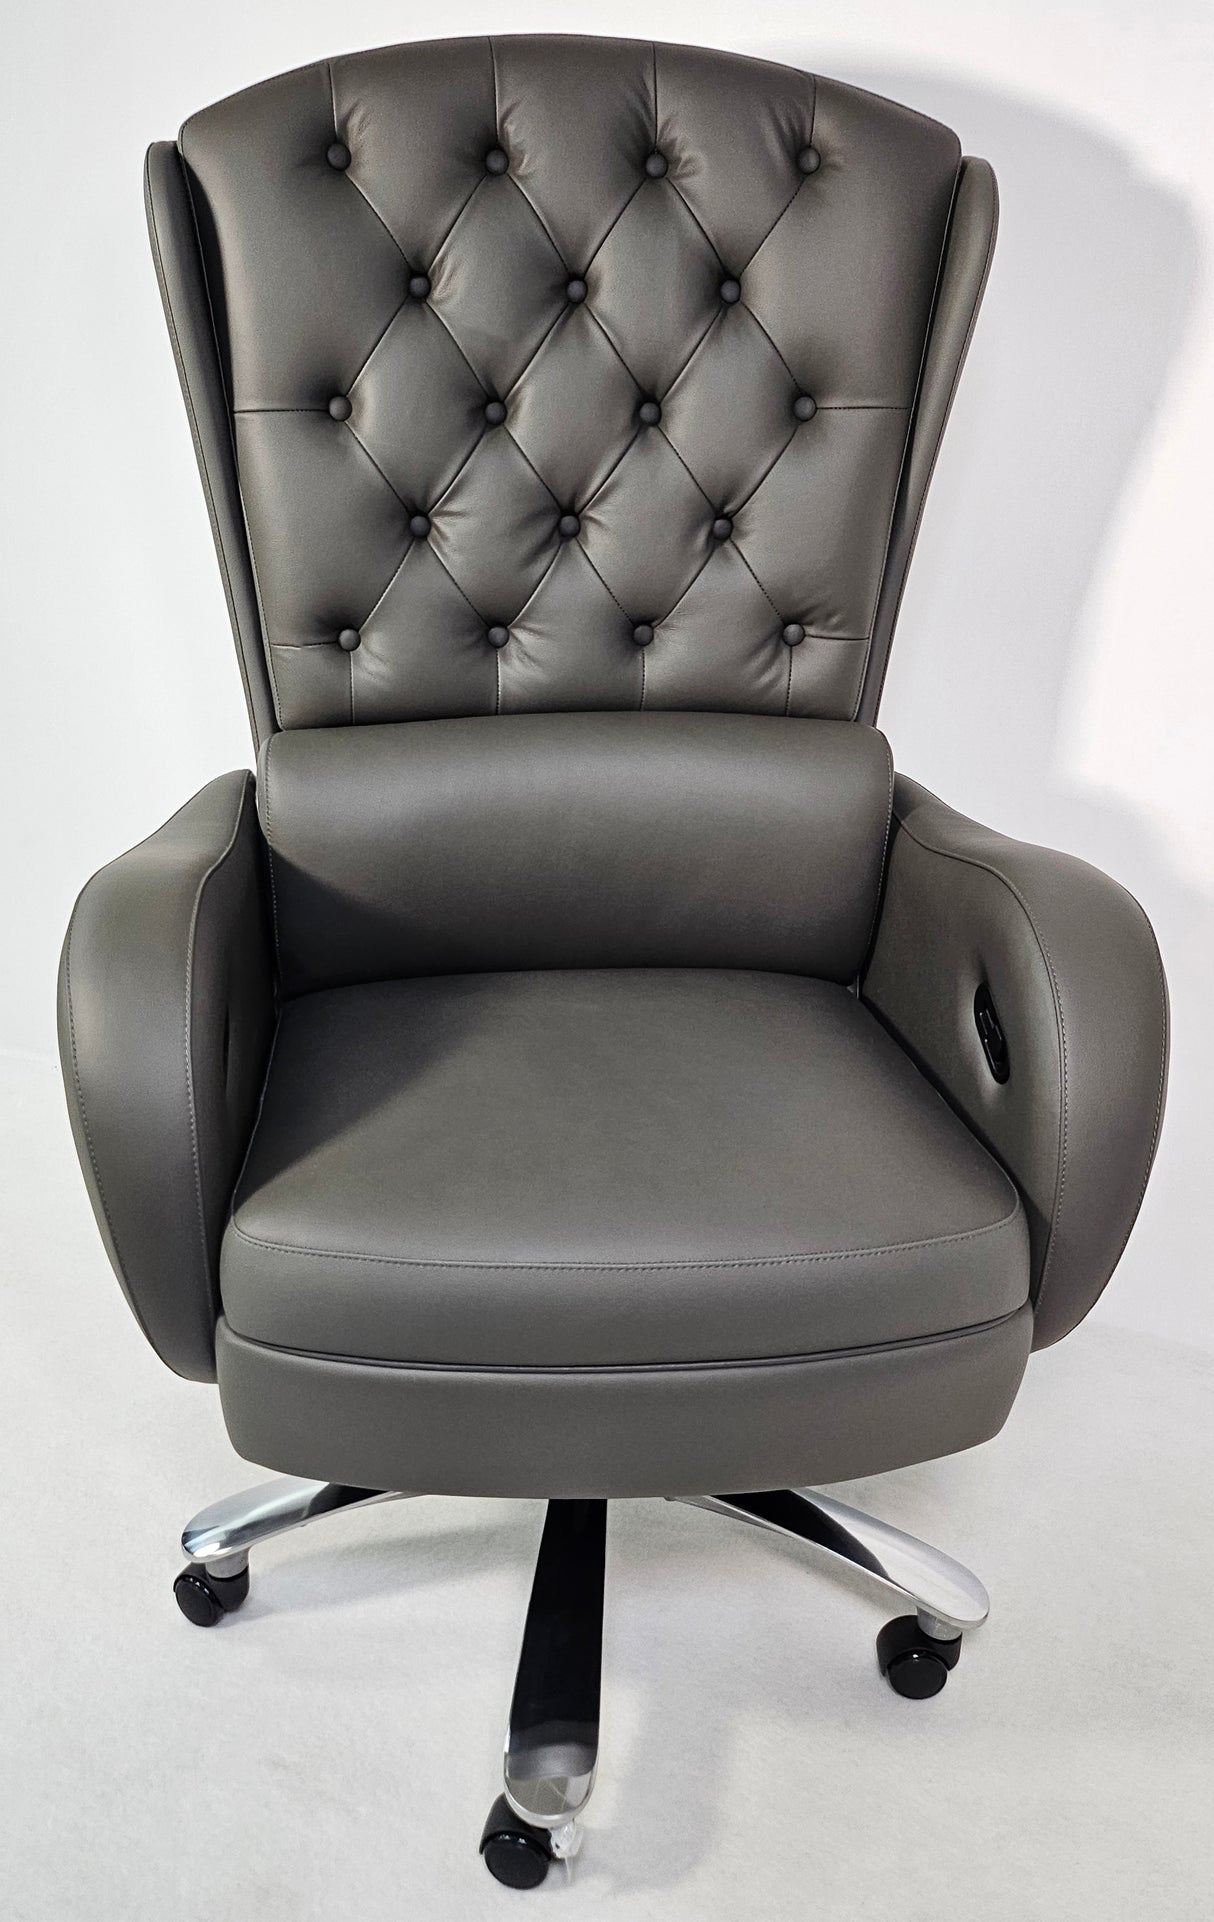 Genuine Grey Leather High Back Executive Office Chair with Chesterfield Design - 6002HL